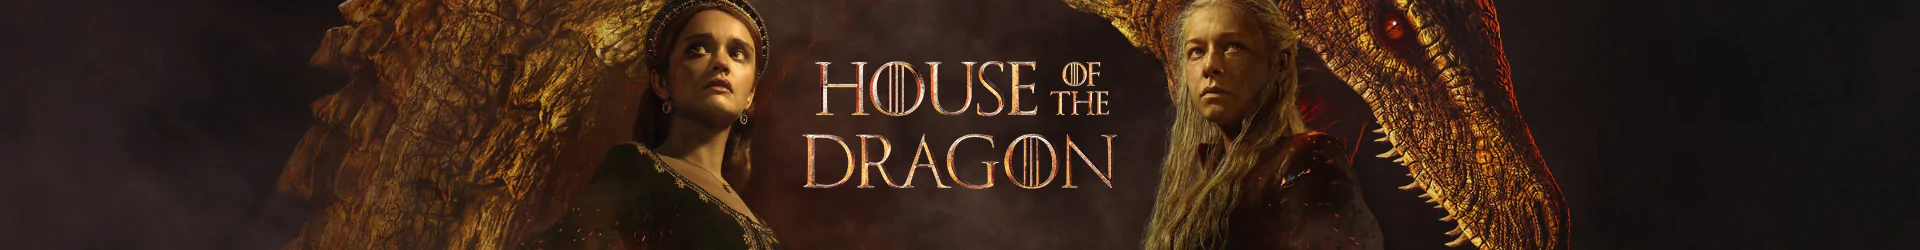 House of the Dragon hoodies banner